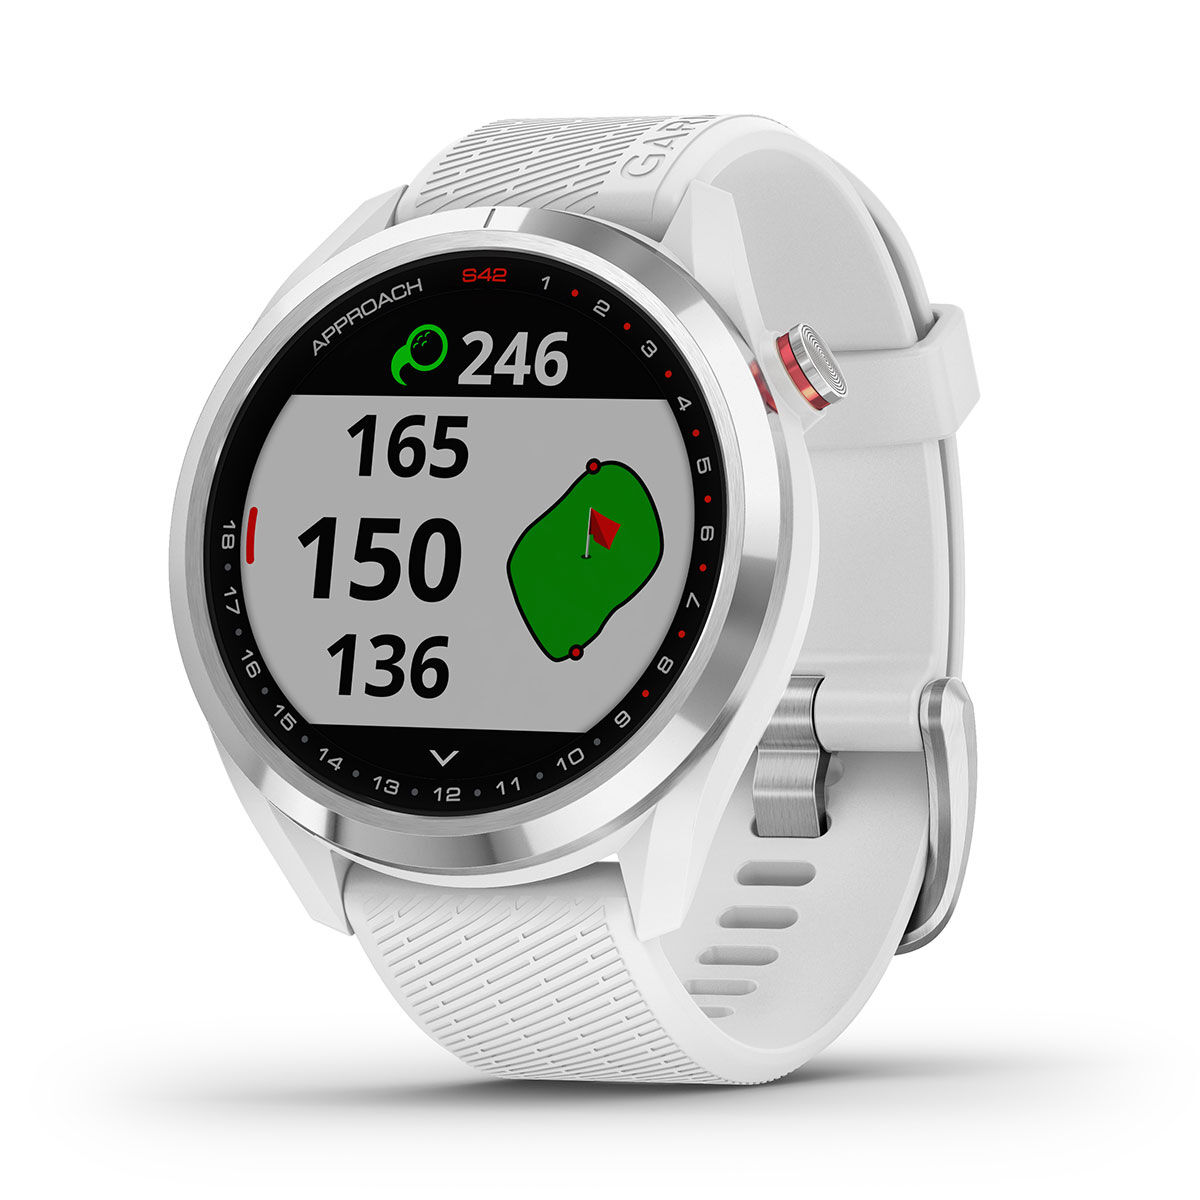 Garmin Golf GPS Watch, Silver and White Stylish Approach S42 | American Golf, One Size